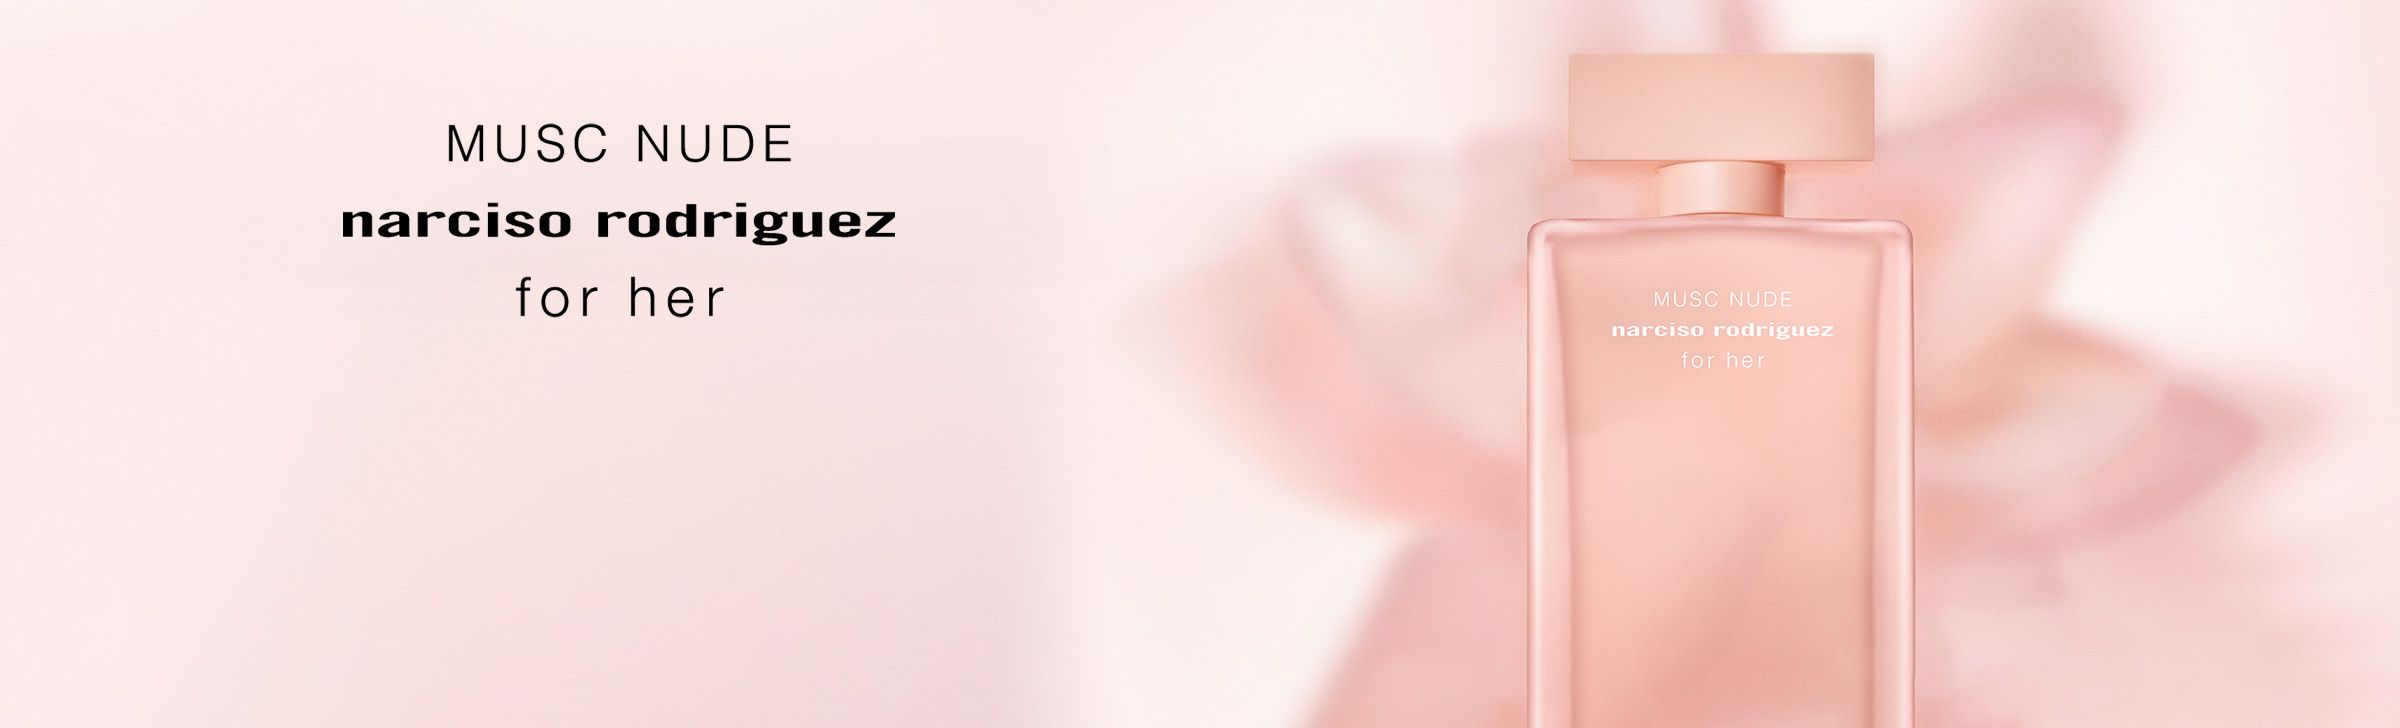 Narciso Rodriguez brand banner - the new fragrance for her